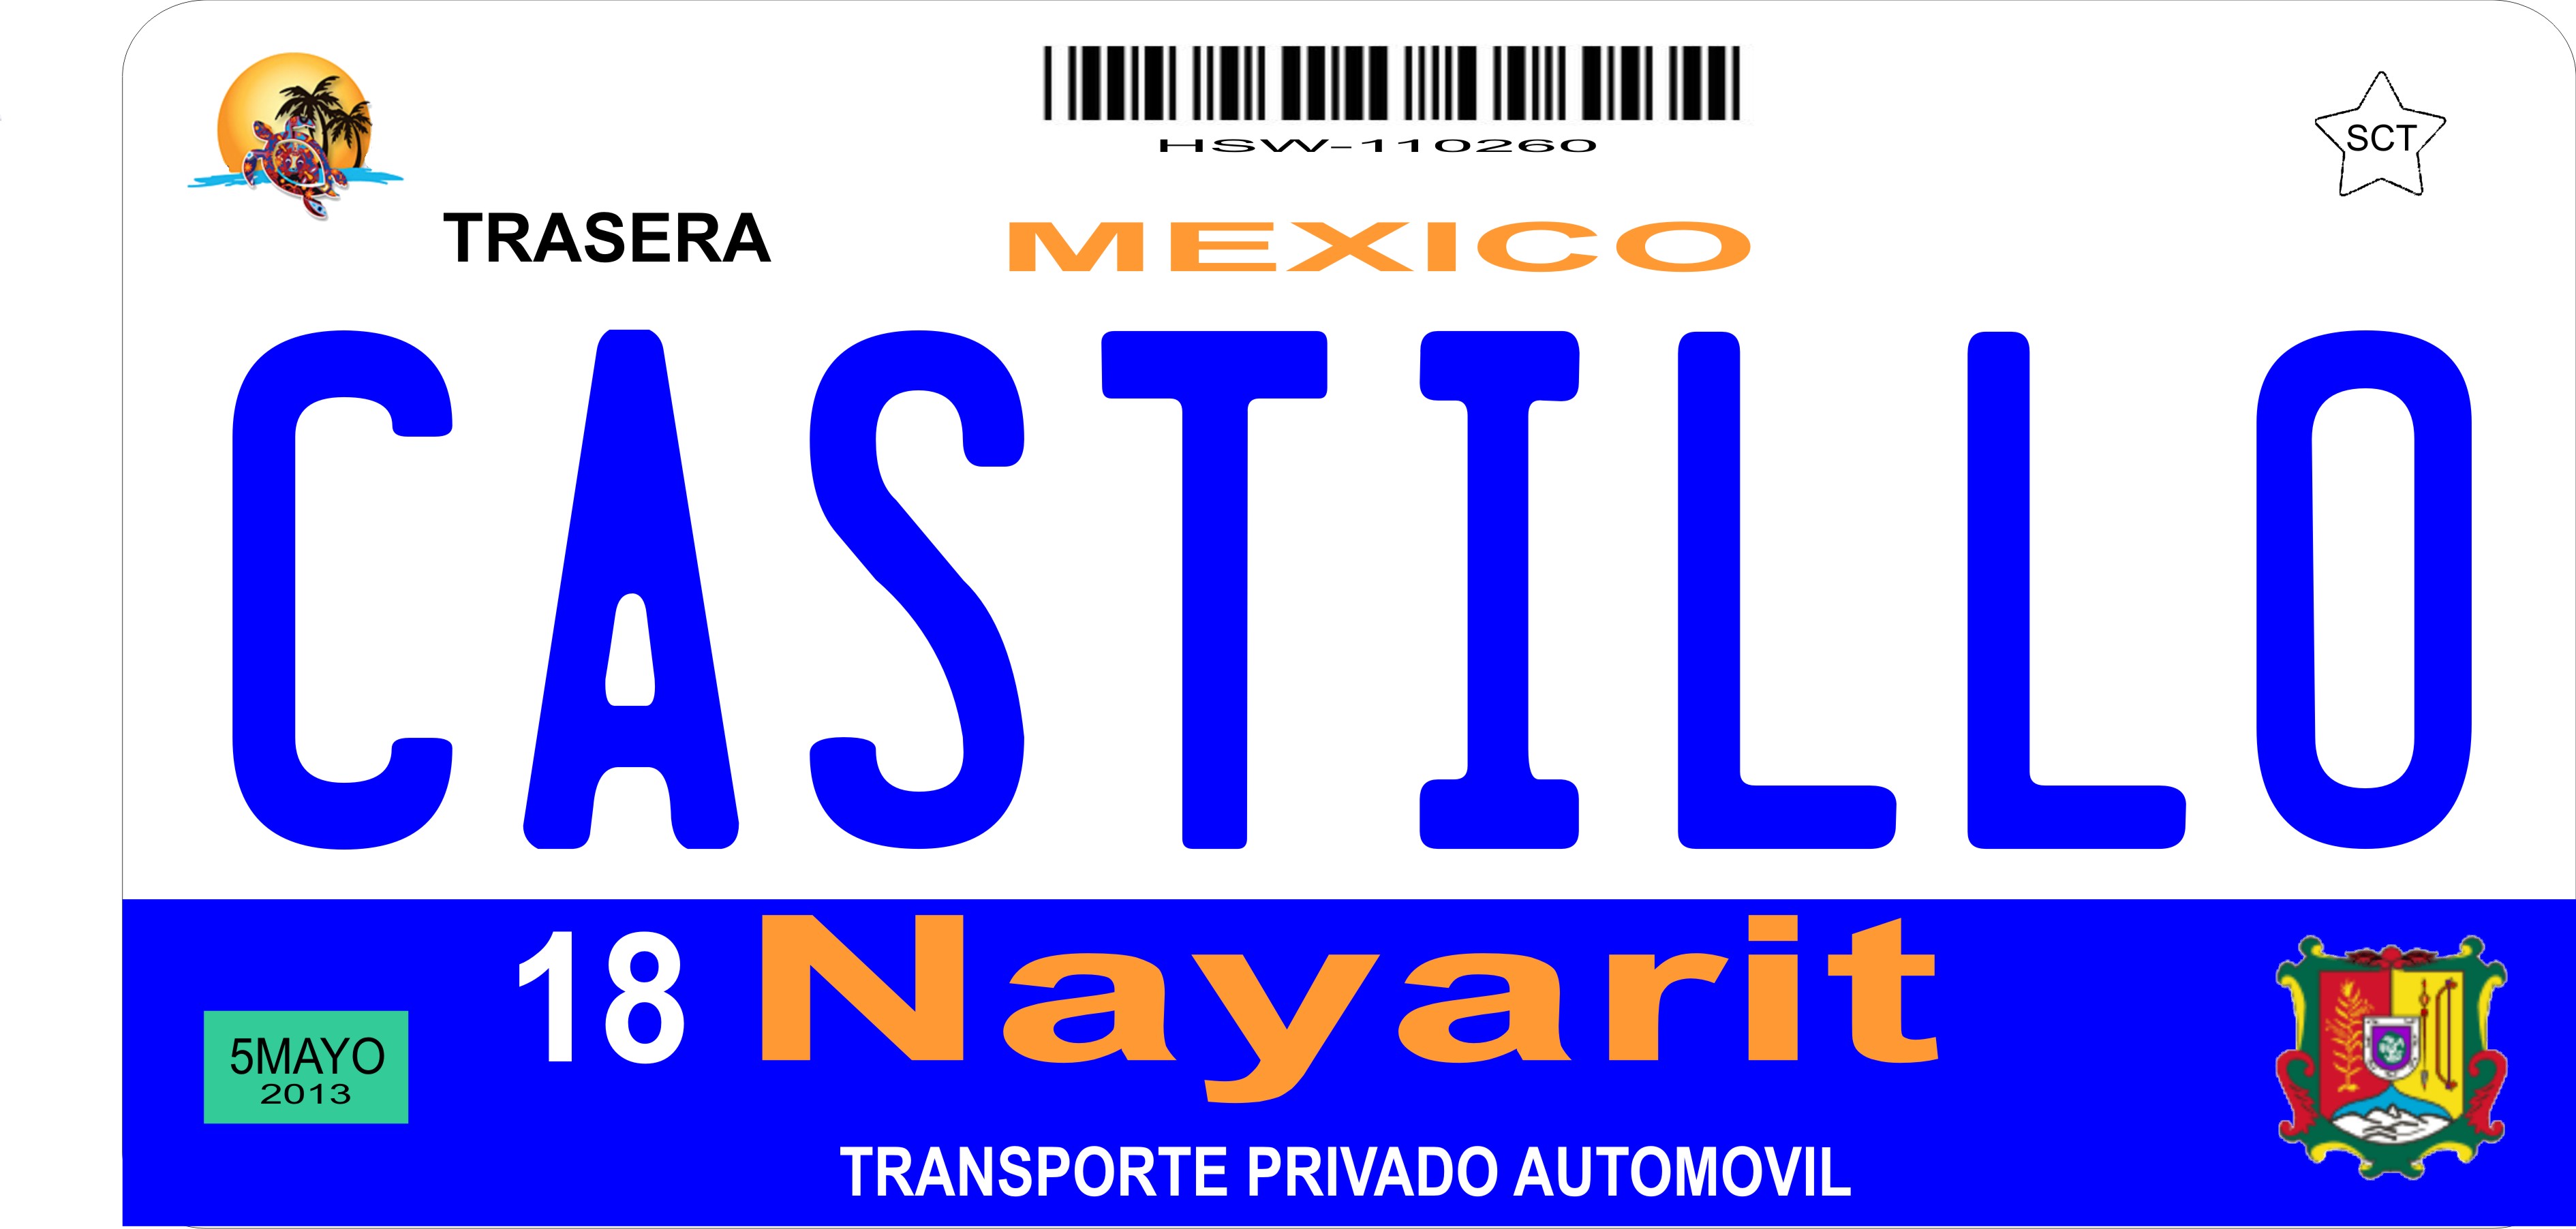 Mexico Nayarit Photo LICENSE PLATE  Free Personalization on this PLATE